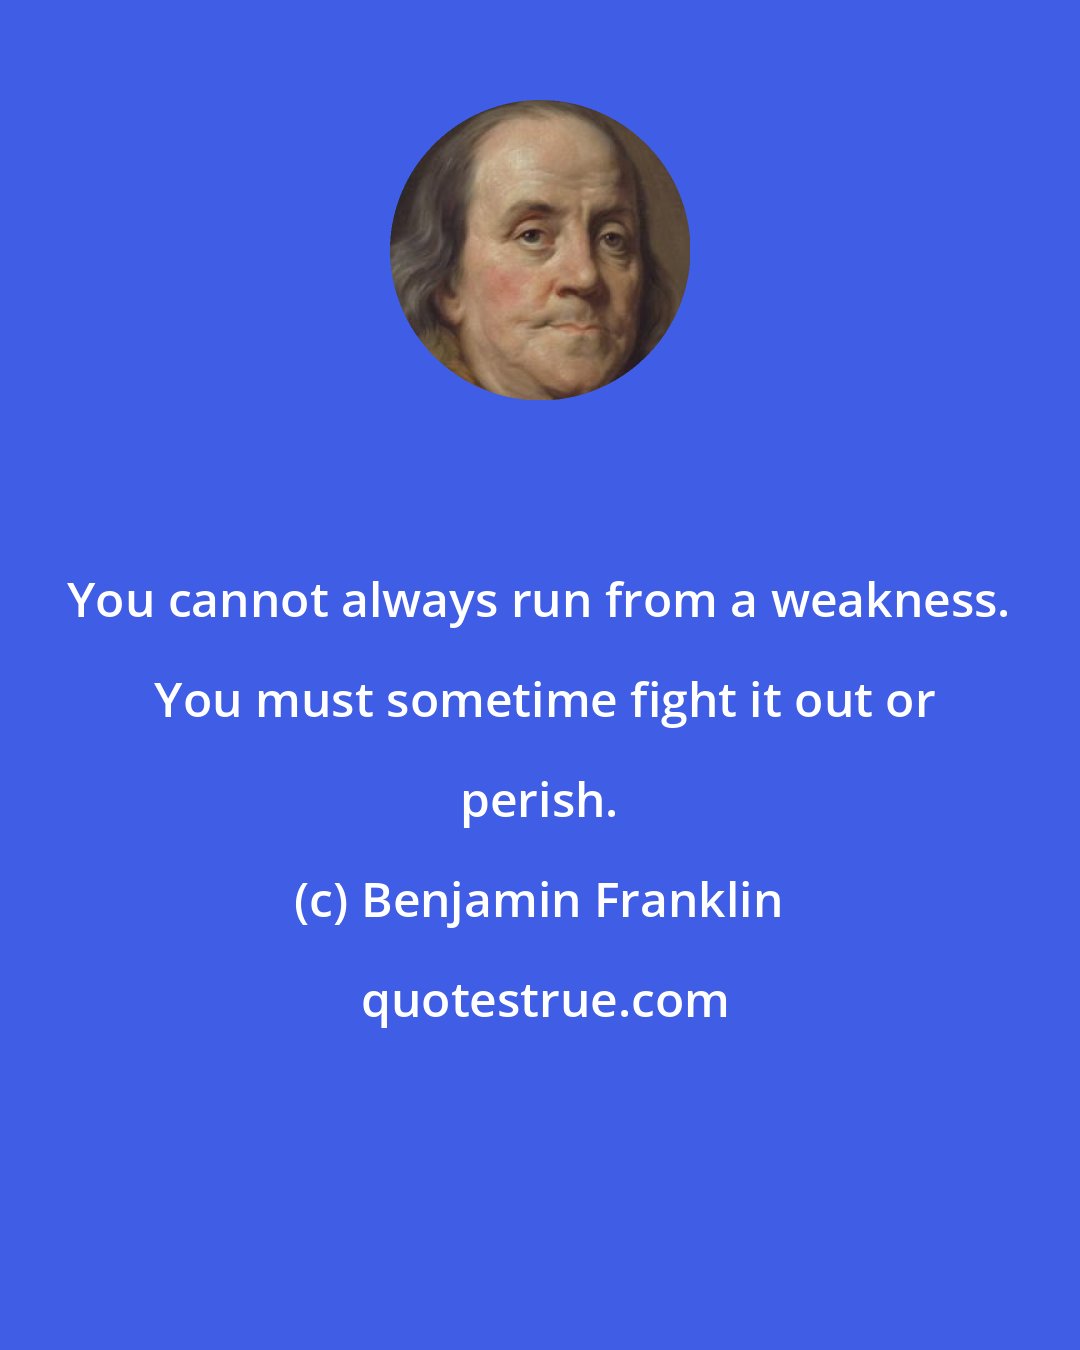 Benjamin Franklin: You cannot always run from a weakness.  You must sometime fight it out or perish.